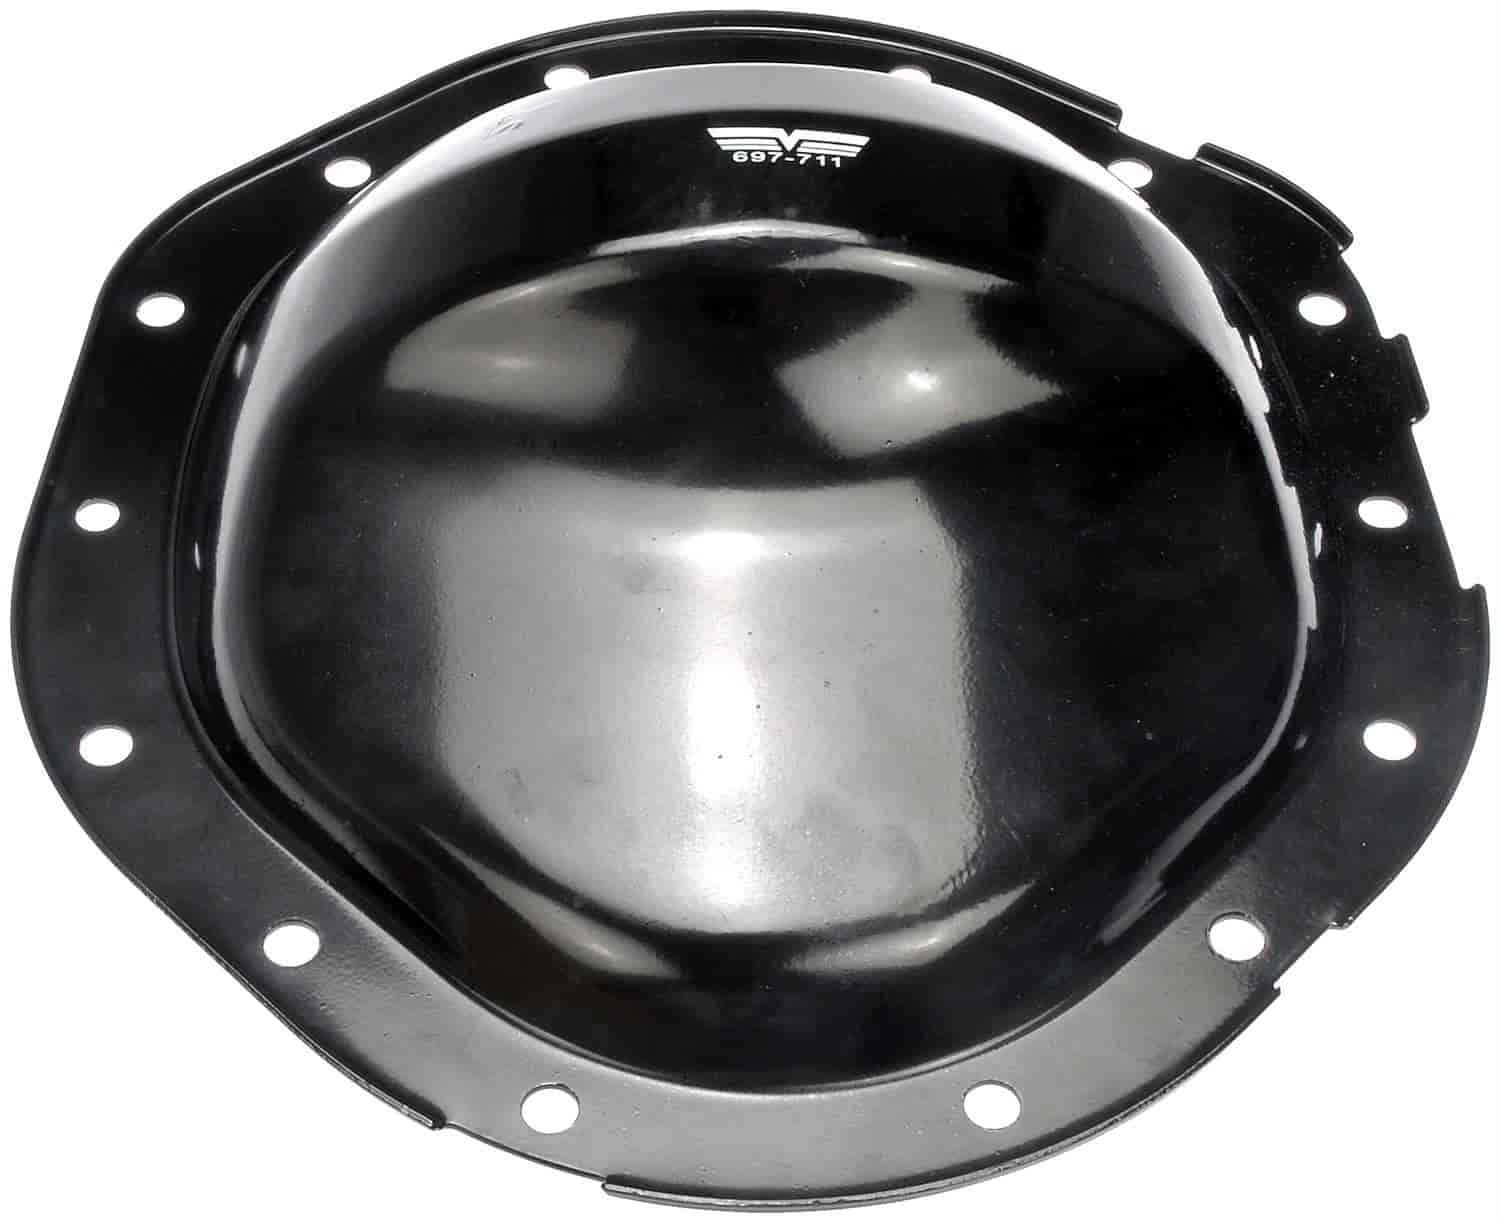 Rear Differential Cover 2002-2006 Cadillac, 1985-2009 Chevy/GMC